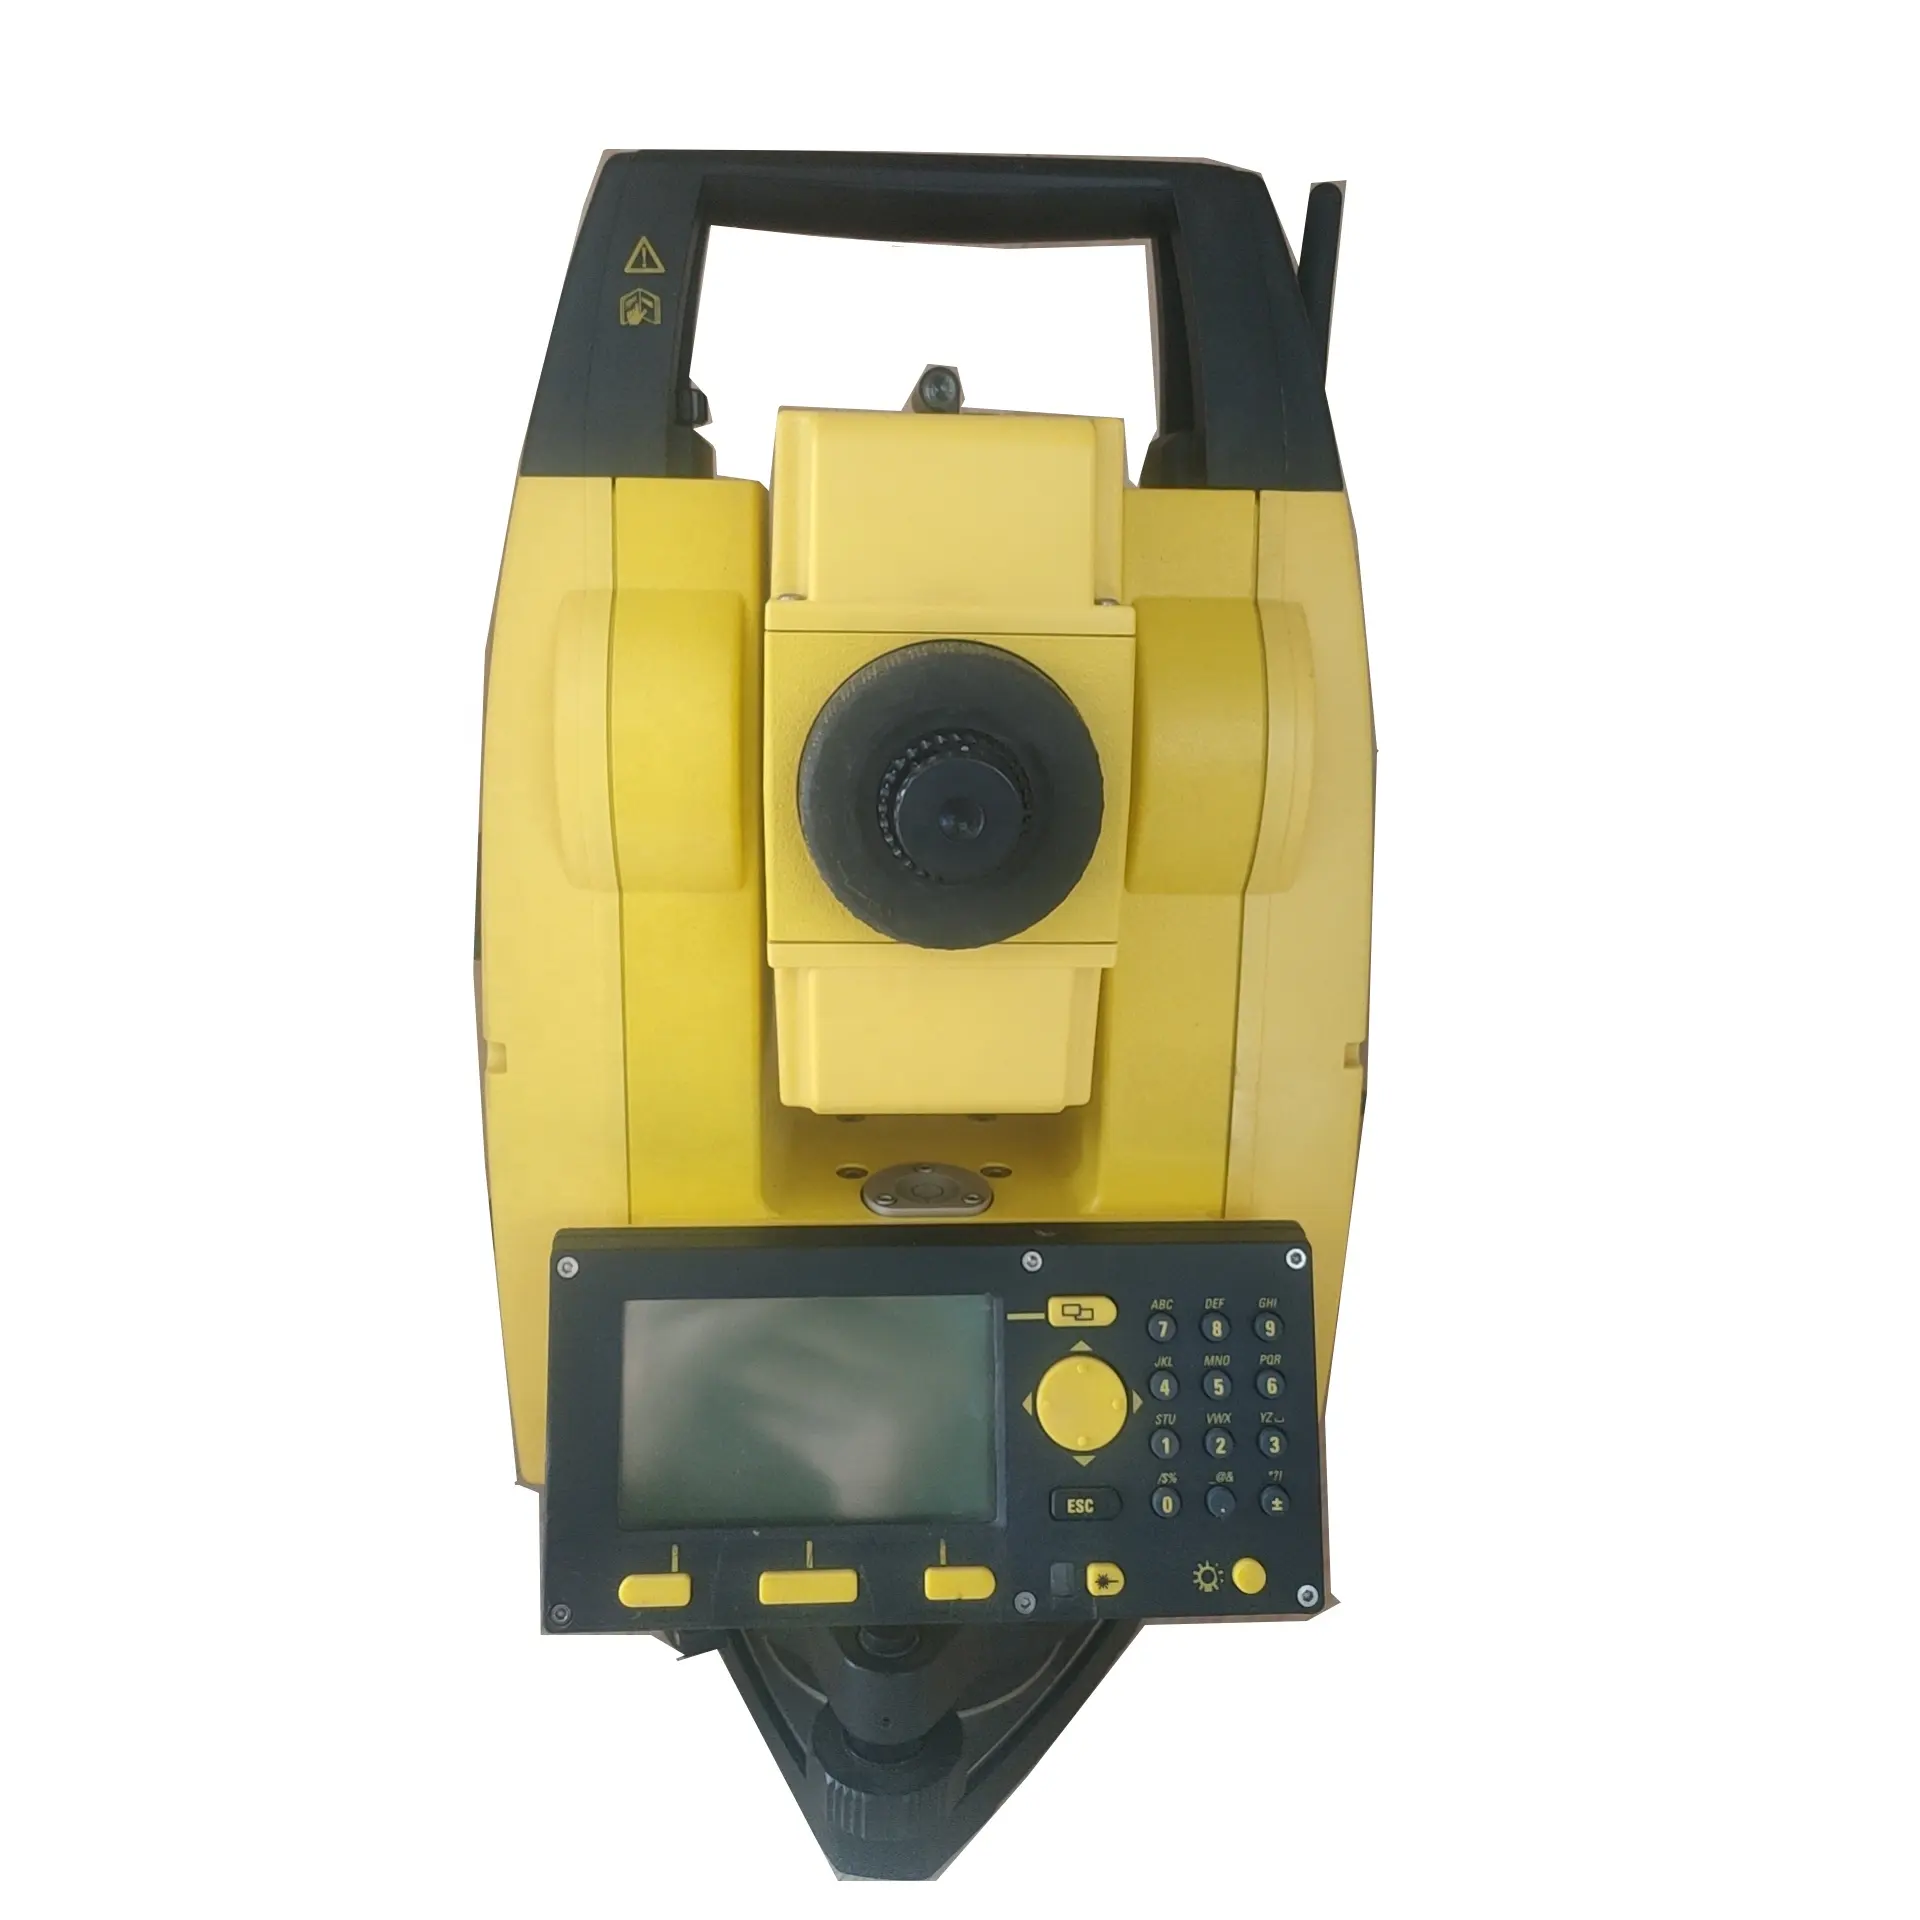 second hand or used Leic builder 502 2'' total station surveying instrument